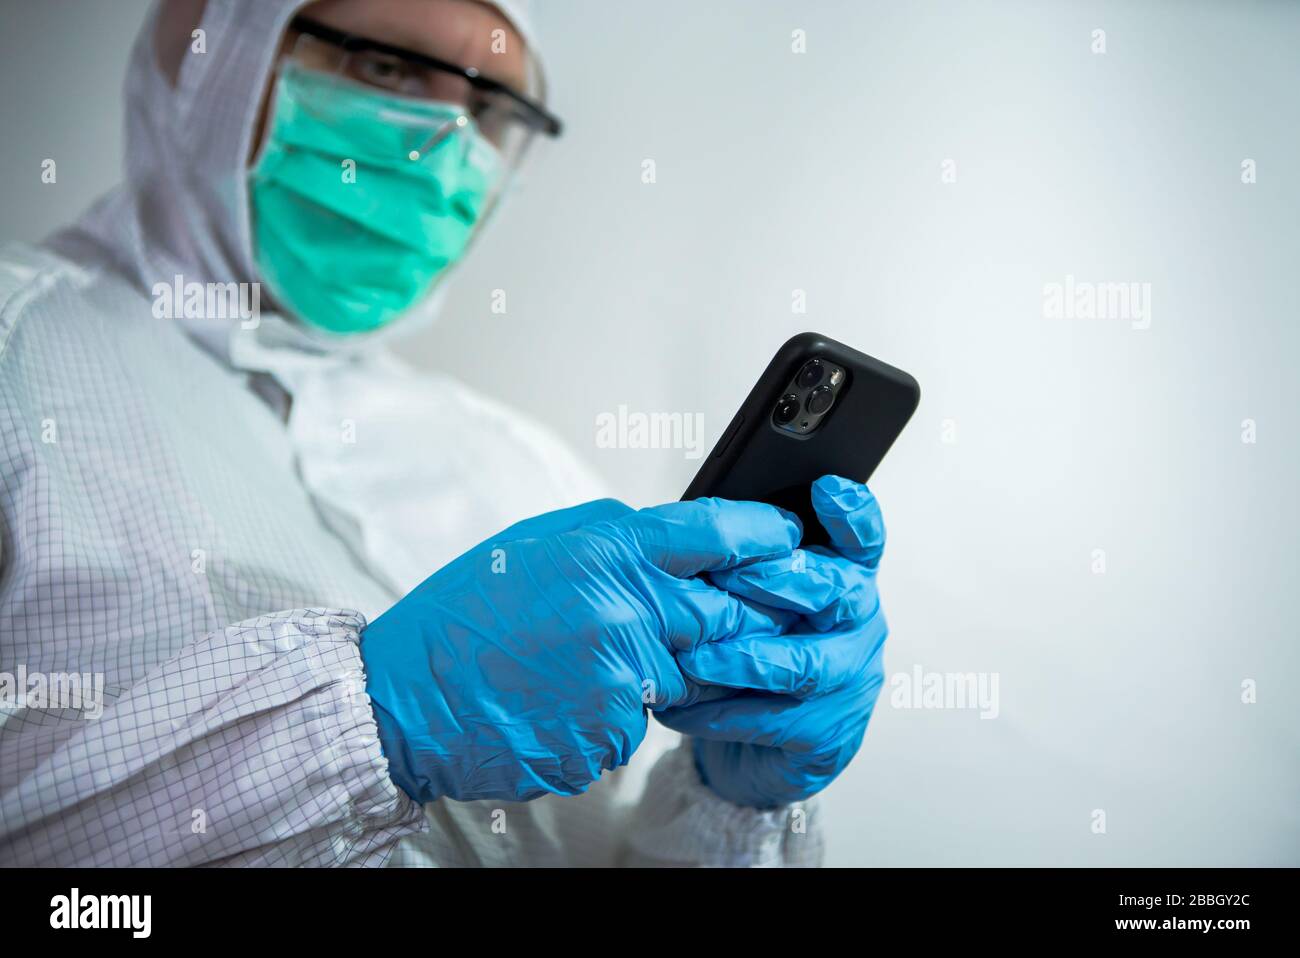 Caucasian man wearing a protective suit and face mask using smartphone on laboratory. Doctor using phone device. Coronavirus has caused emergency situ Stock Photo